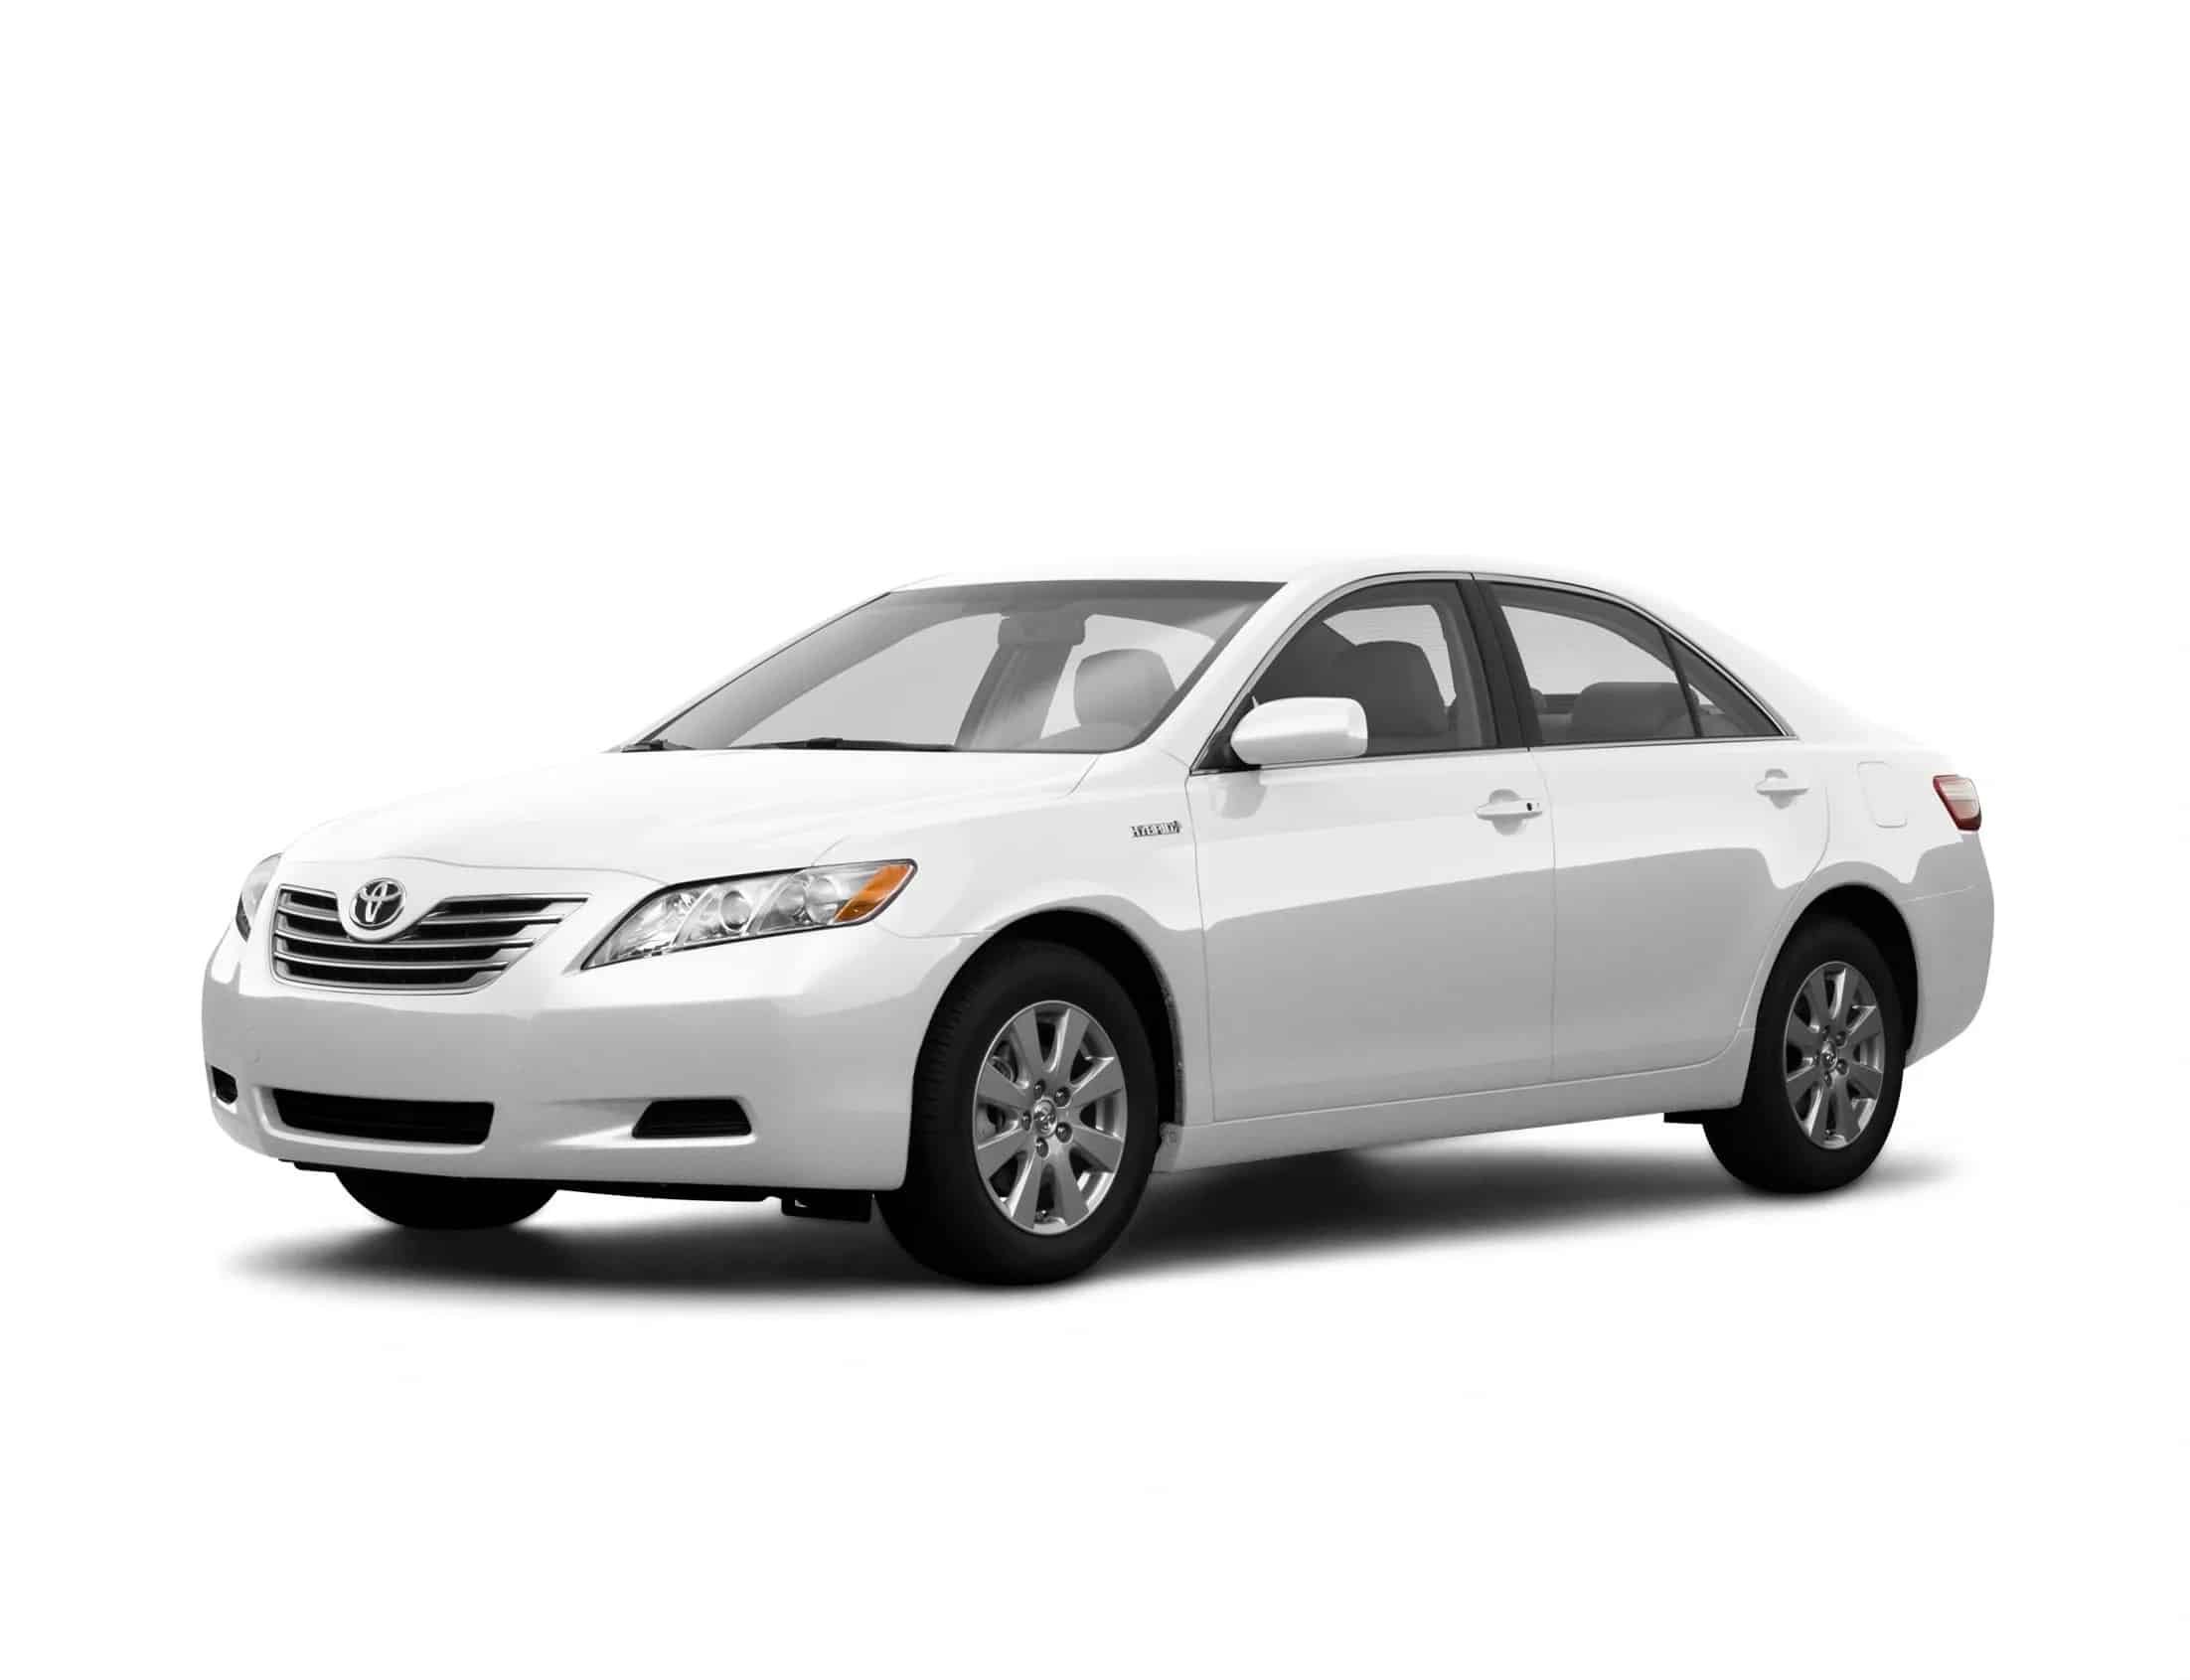 Side profile of a white toyota car with a white background